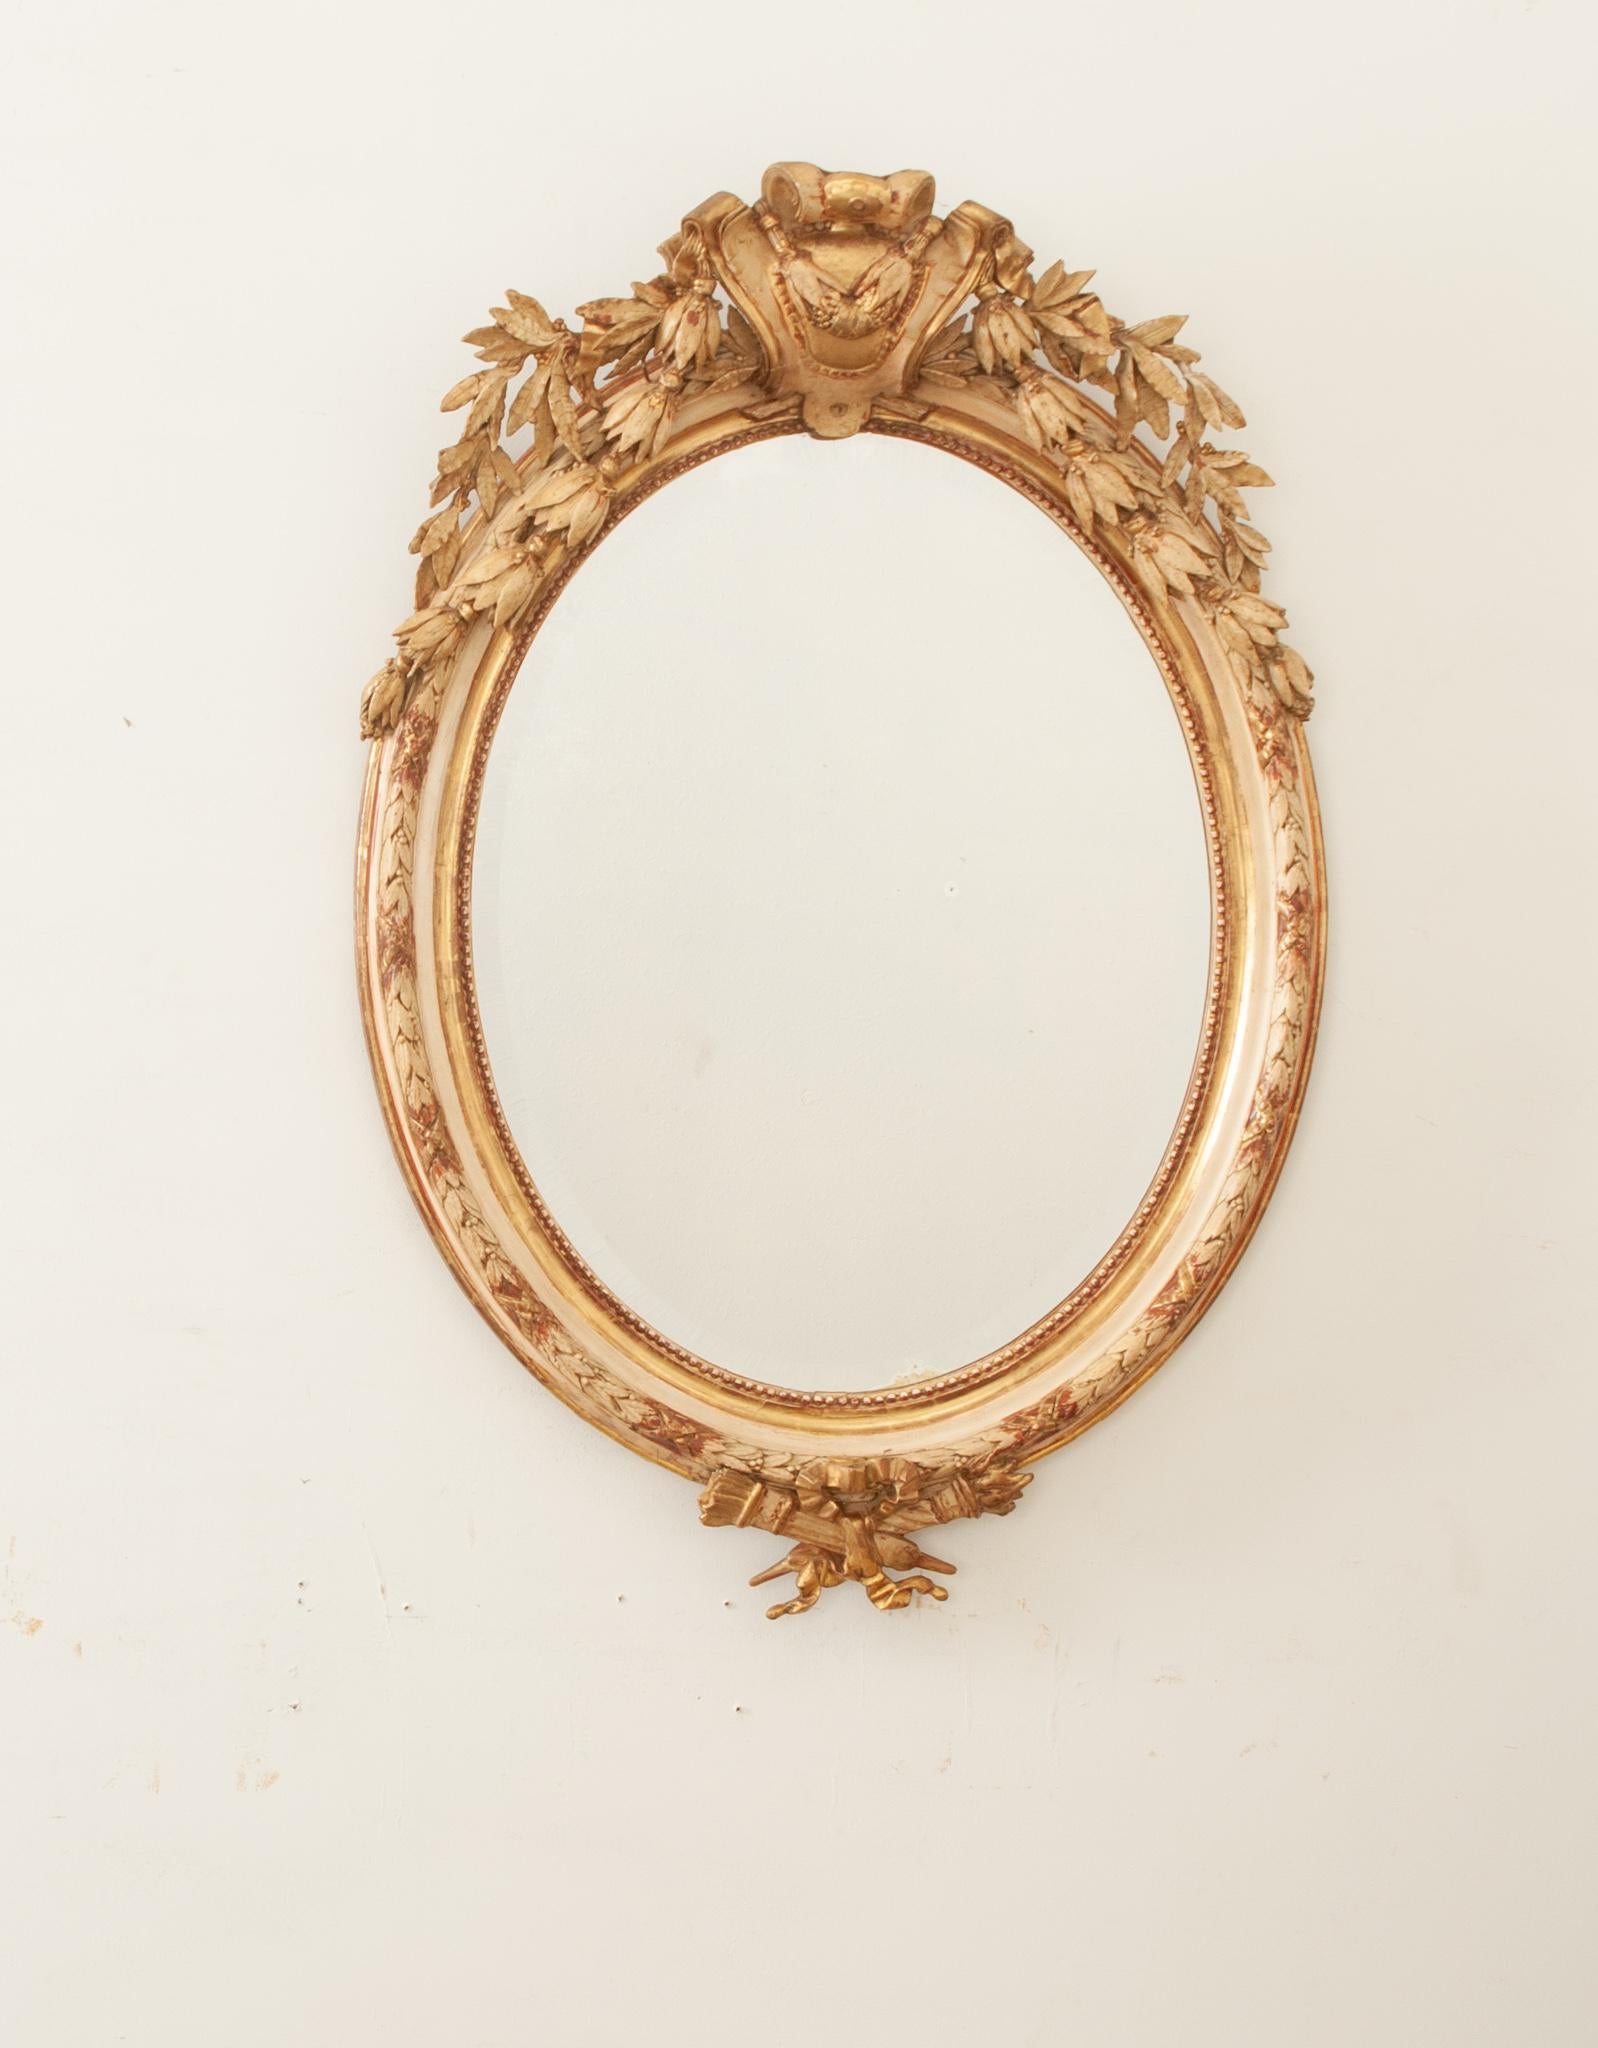 A circa 1840 French Louis XVI style gilt carved wood wall mirror crafted in 19th century France. The original beveled mercury mirror is in great condition and is surrounded by the handsome carved bead border of its cream-painted and water-gilt frame